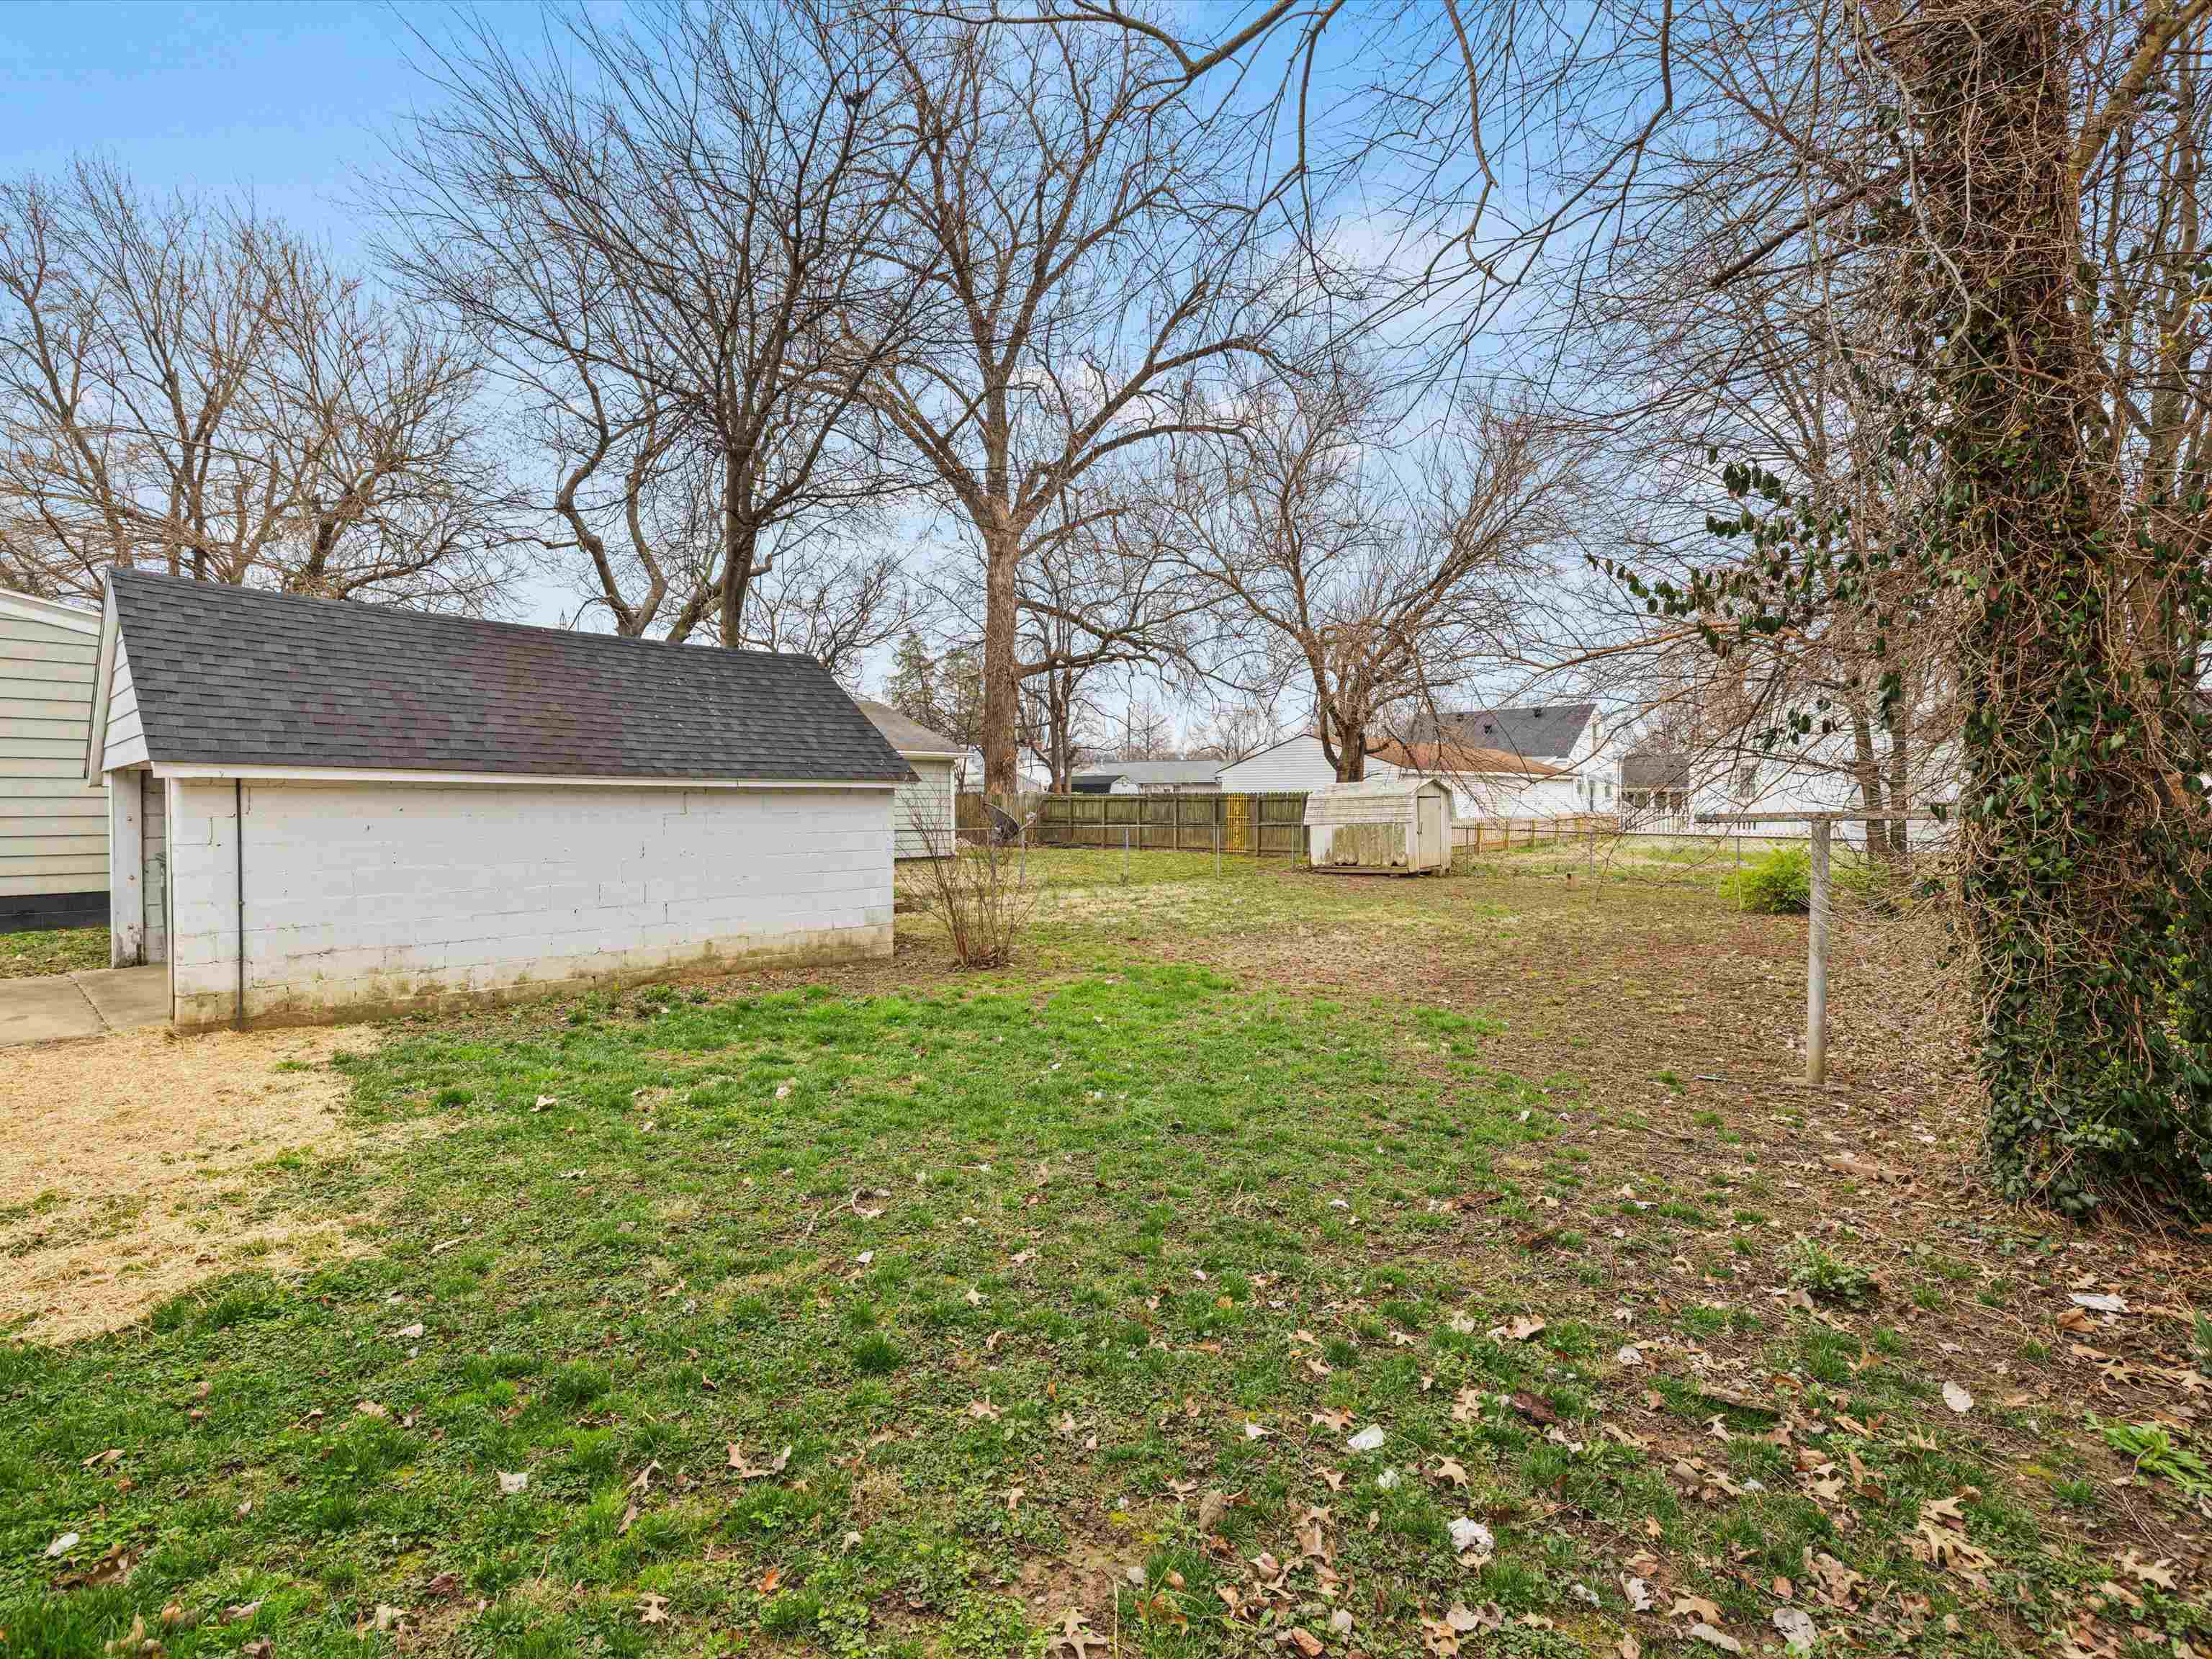 1010 19th St., Owensboro, Kentucky 42303, 3 Bedrooms Bedrooms, ,1 BathroomBathrooms,Single Family Residence,For Sale,19th St.,89353